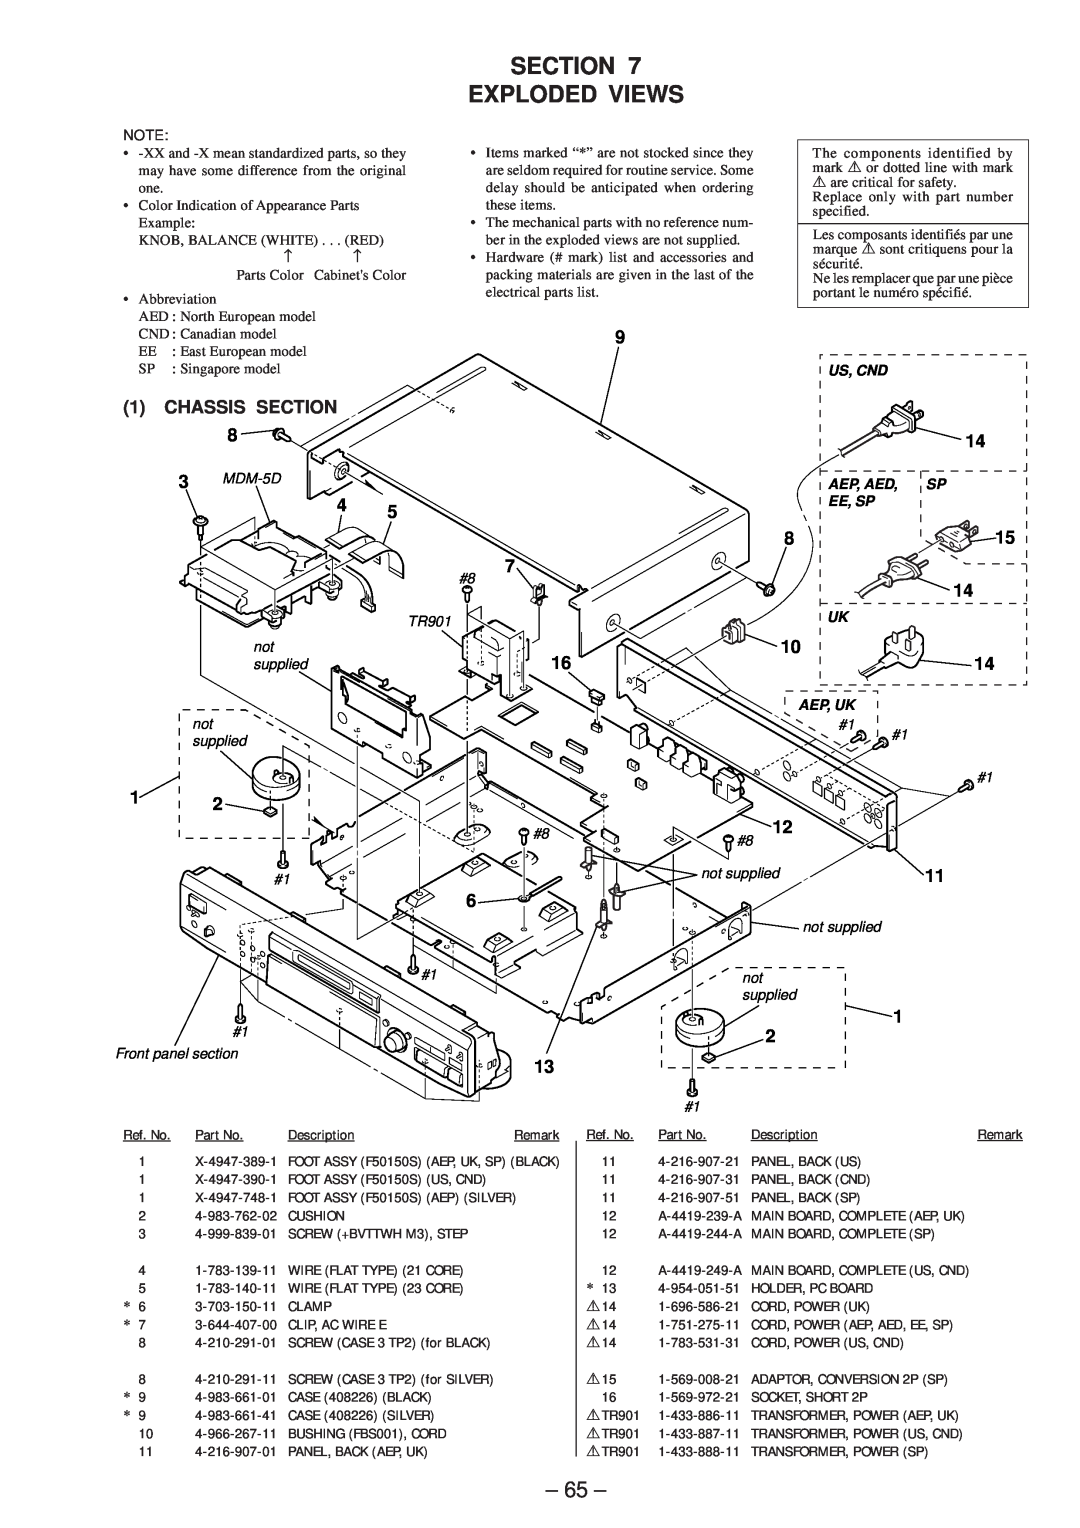 Sony MDS-JE530 service manual Section Exploded Views, 65, 1CHASSIS SECTION 